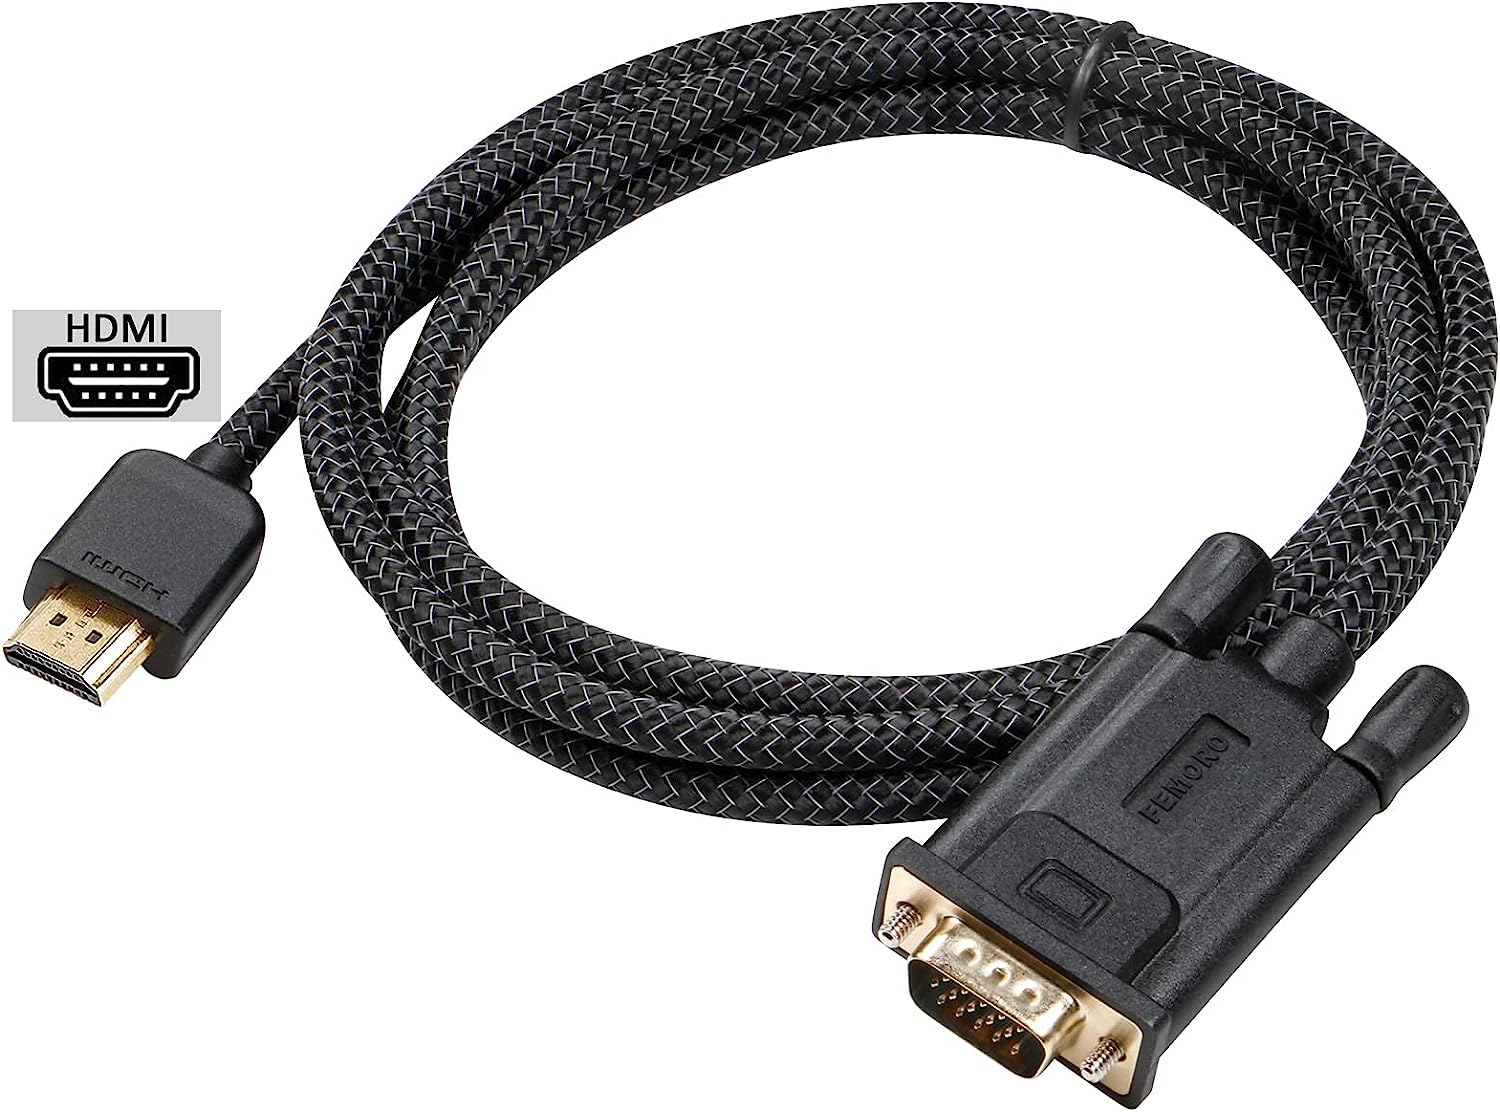 FEMORO HDMI to VGA Cable 6 Feet Male to Male Braided [...]